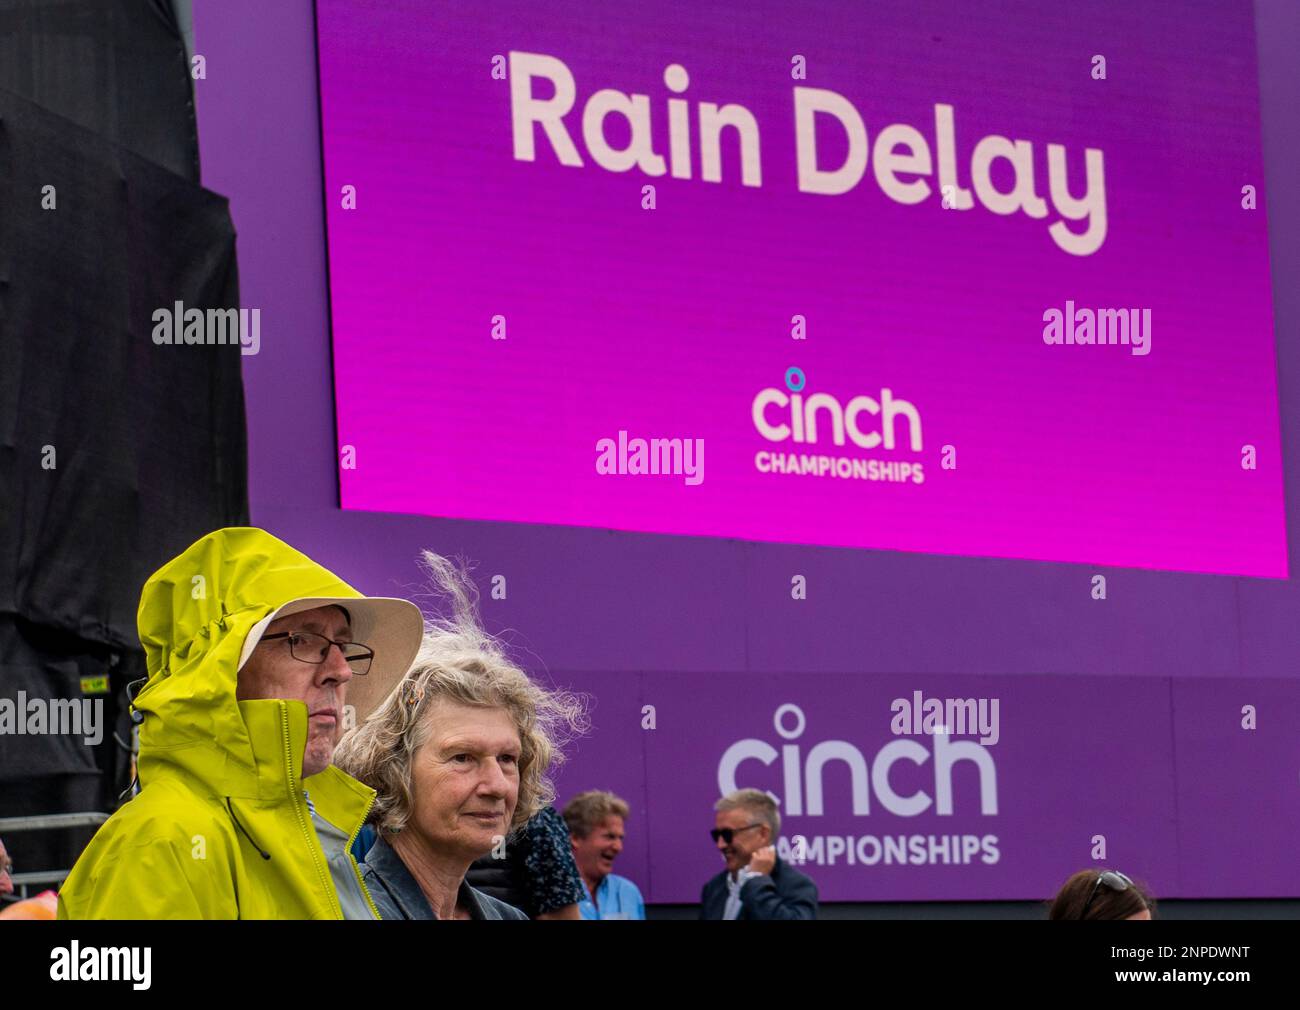 A man and a woman bear the brunt of the bad weather as play is suspended at the Queen's Club tennis tournament. Stock Photo